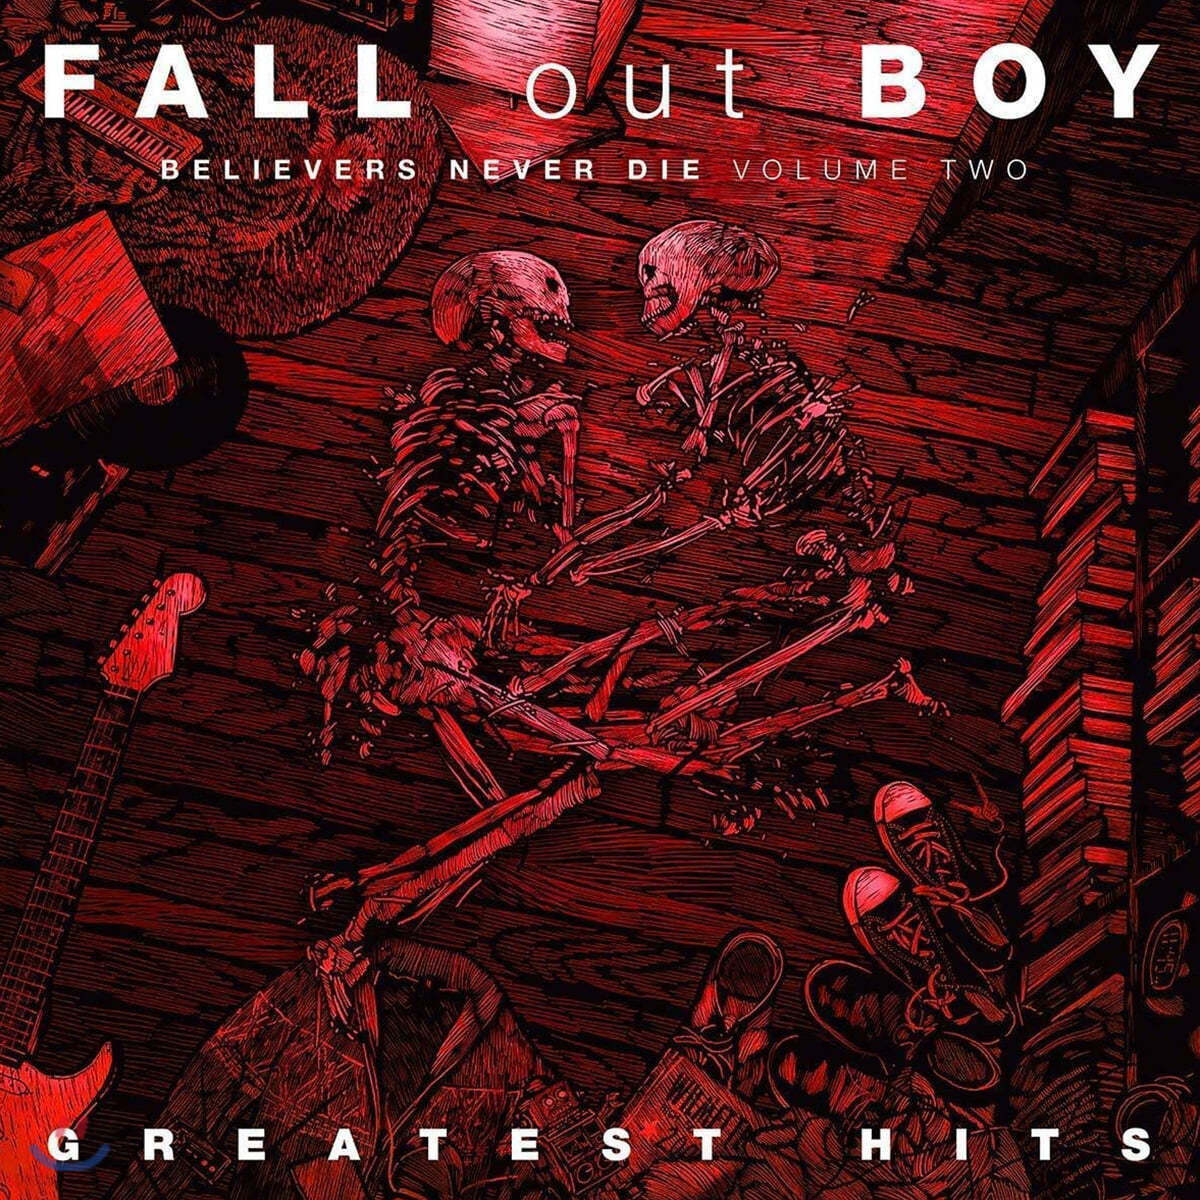 Fall Out Boy (폴 아웃 보이) - Believers Never Die: Greatest Hits Vol.2 [LP]